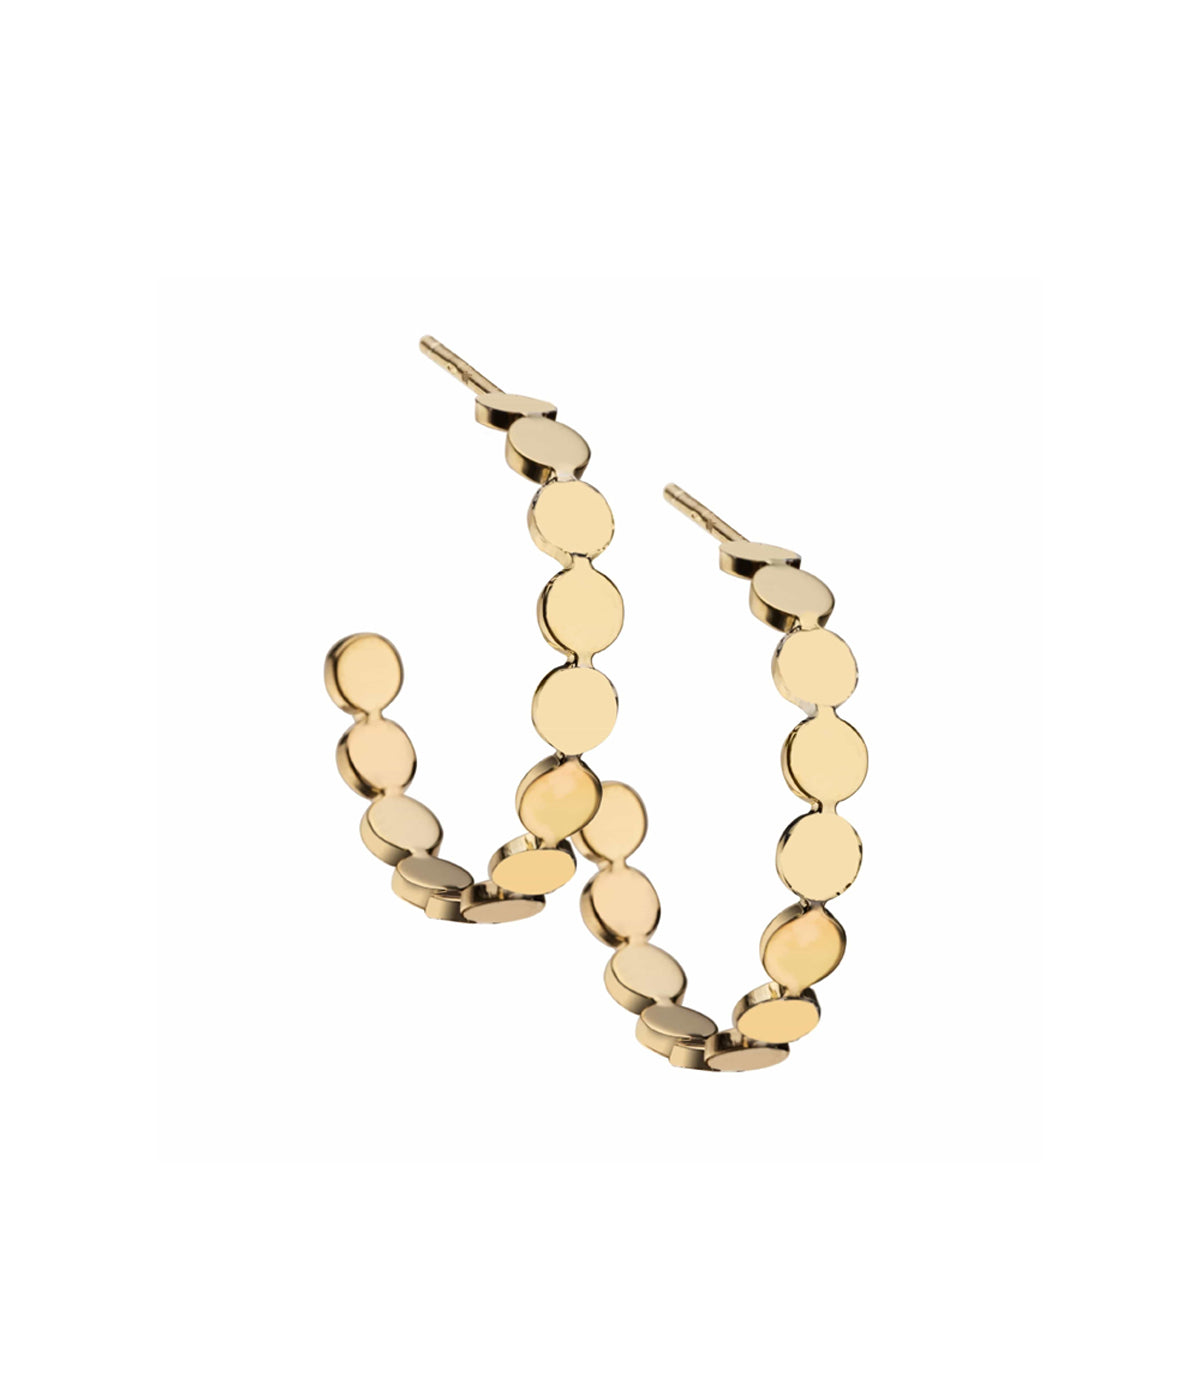 Margaux 1 Hoops in 14K Yellow Gold Plated Silver